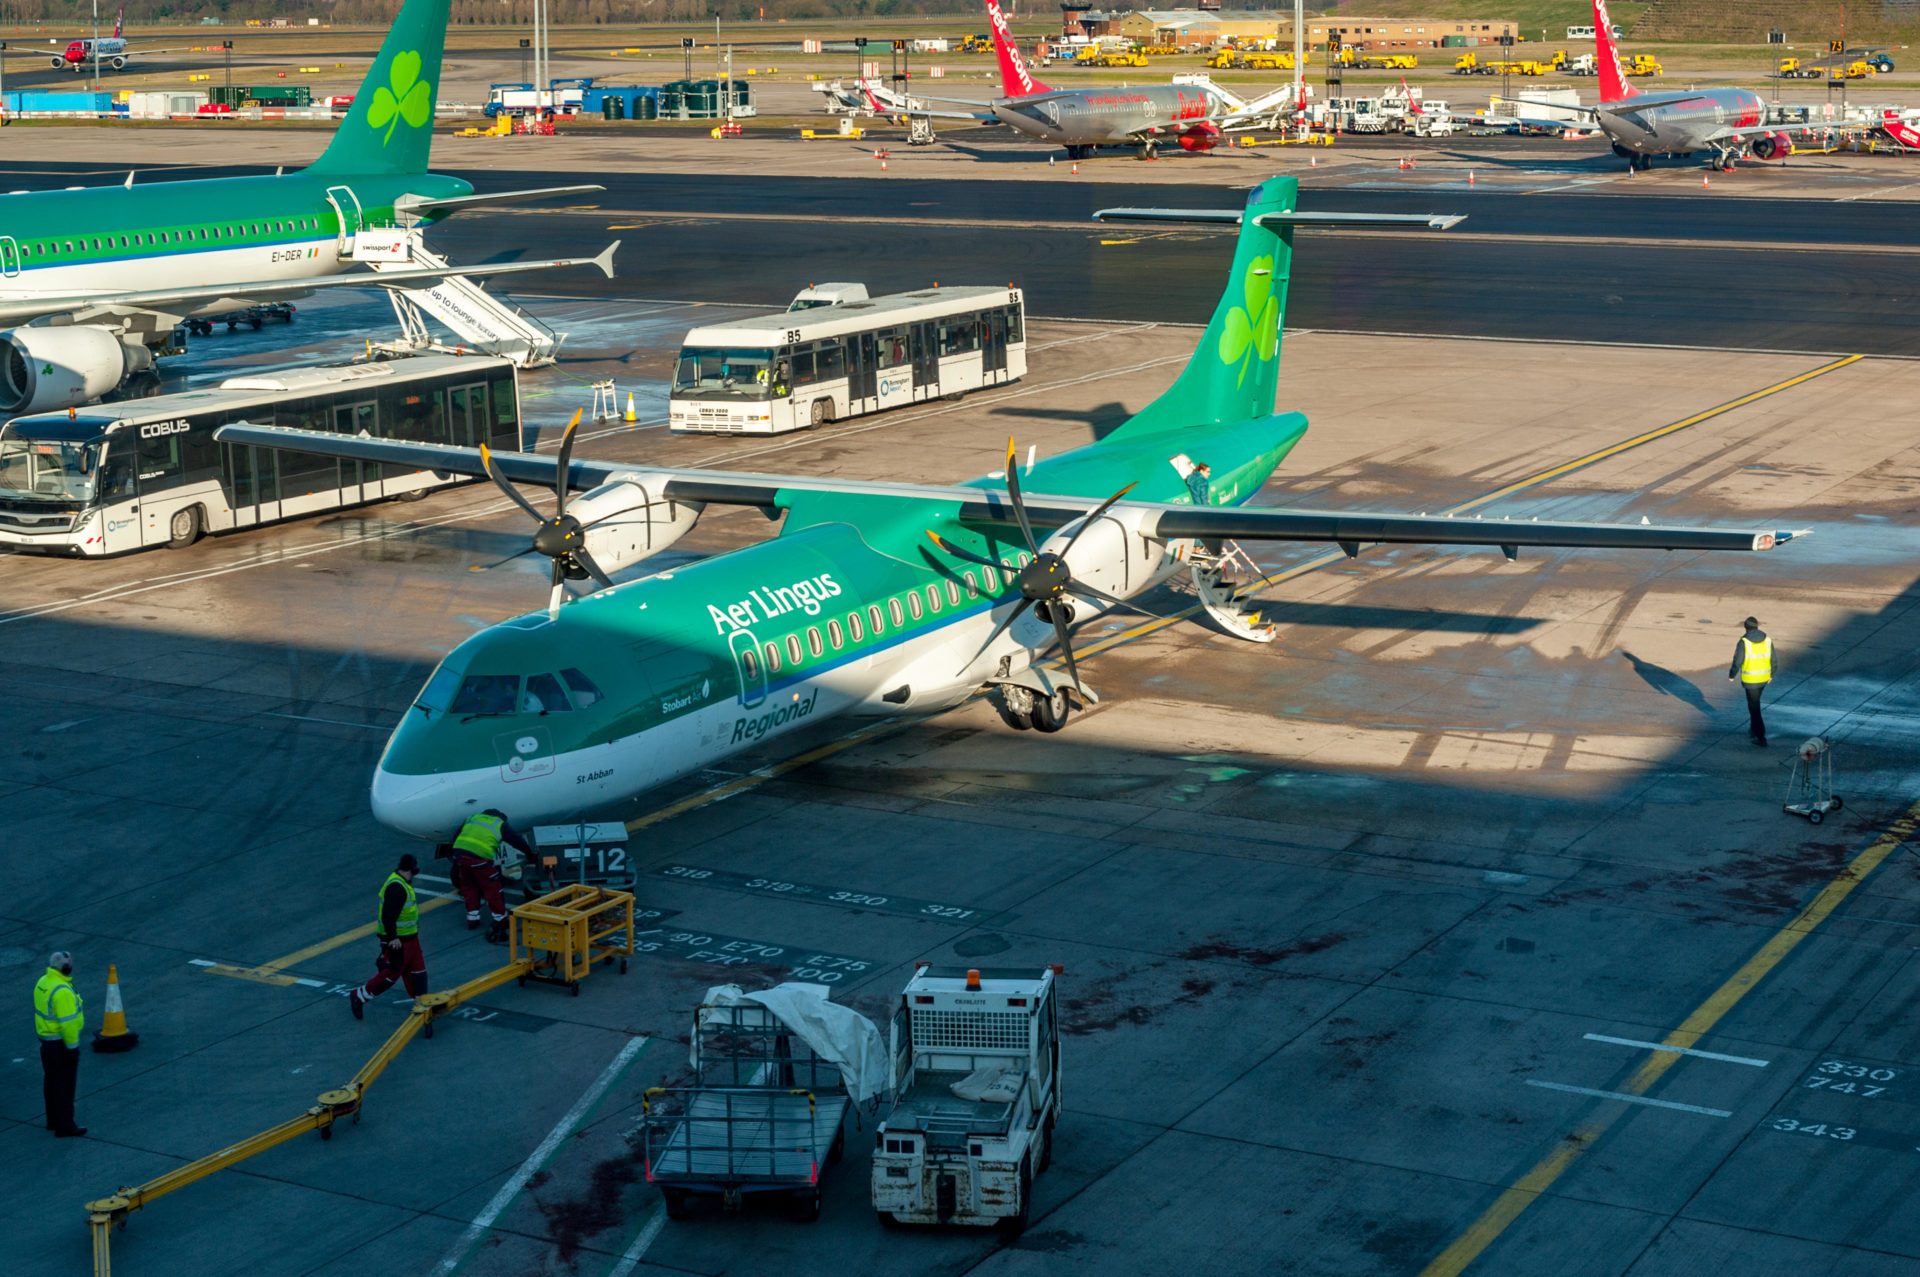 An Aer Lingus ATR 72-600 propeller aircraft on the apron at Birmingham Airport